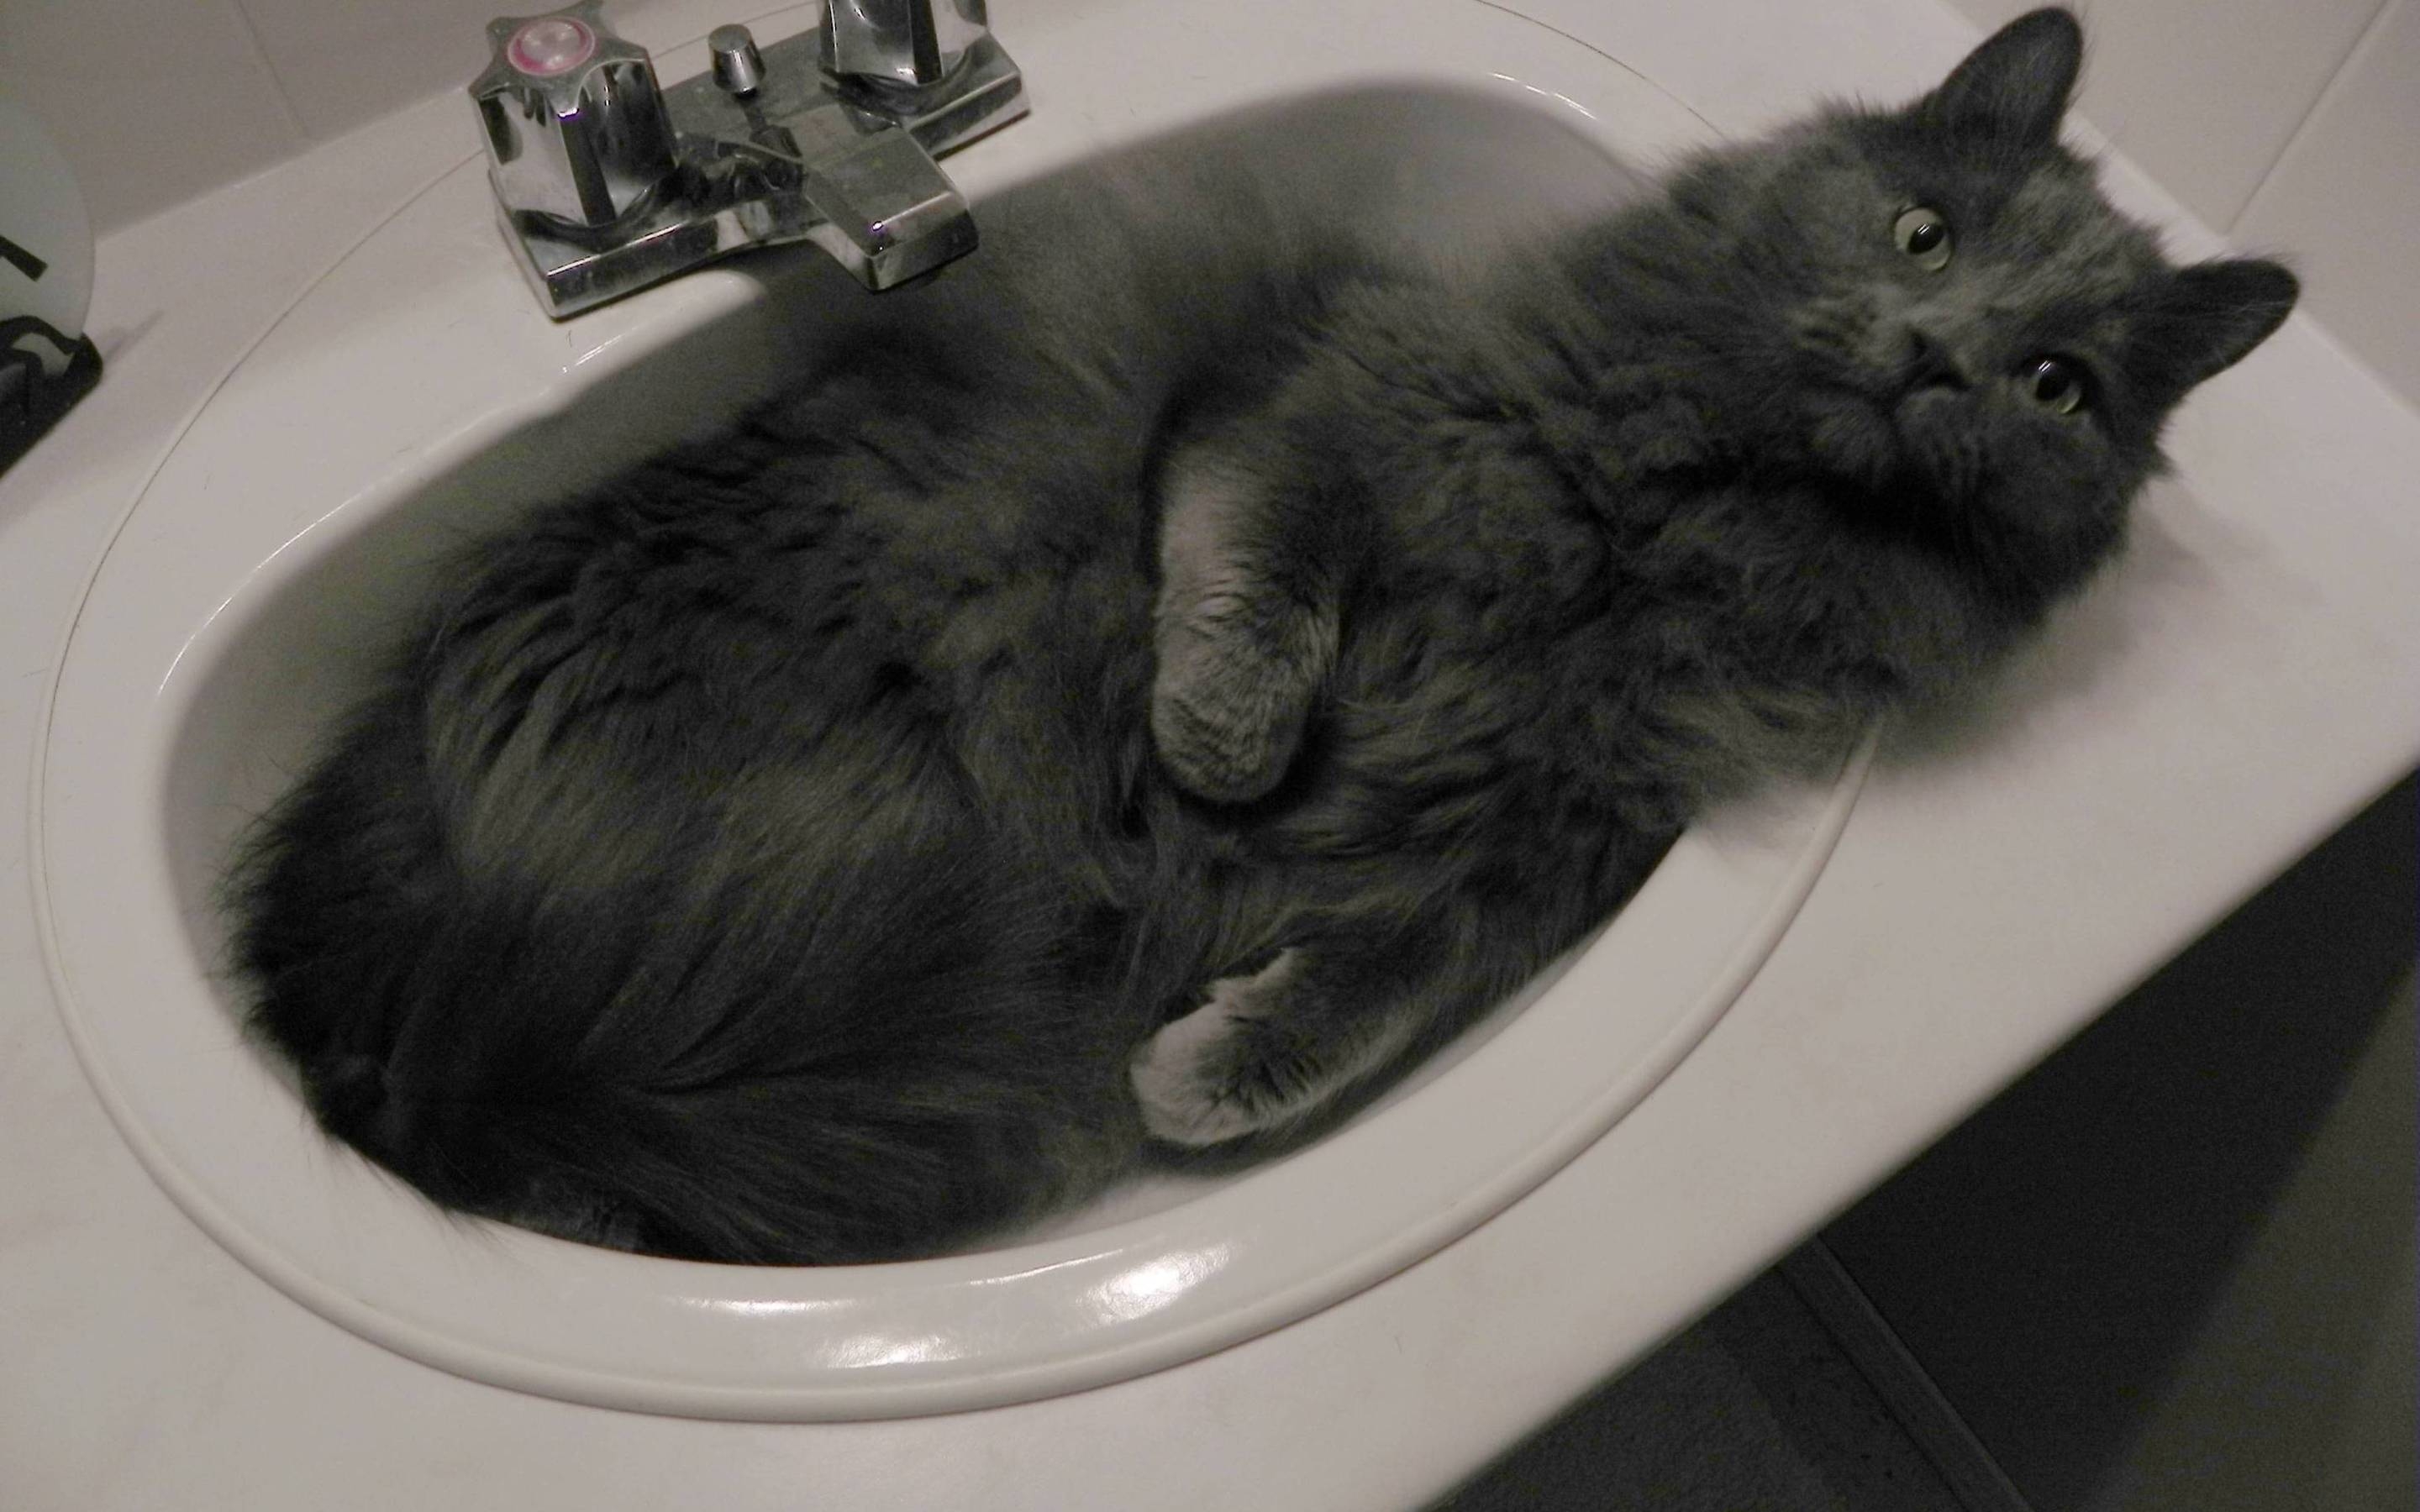 Nebelung Cat in Sink for 2880 x 1800 Retina Display resolution